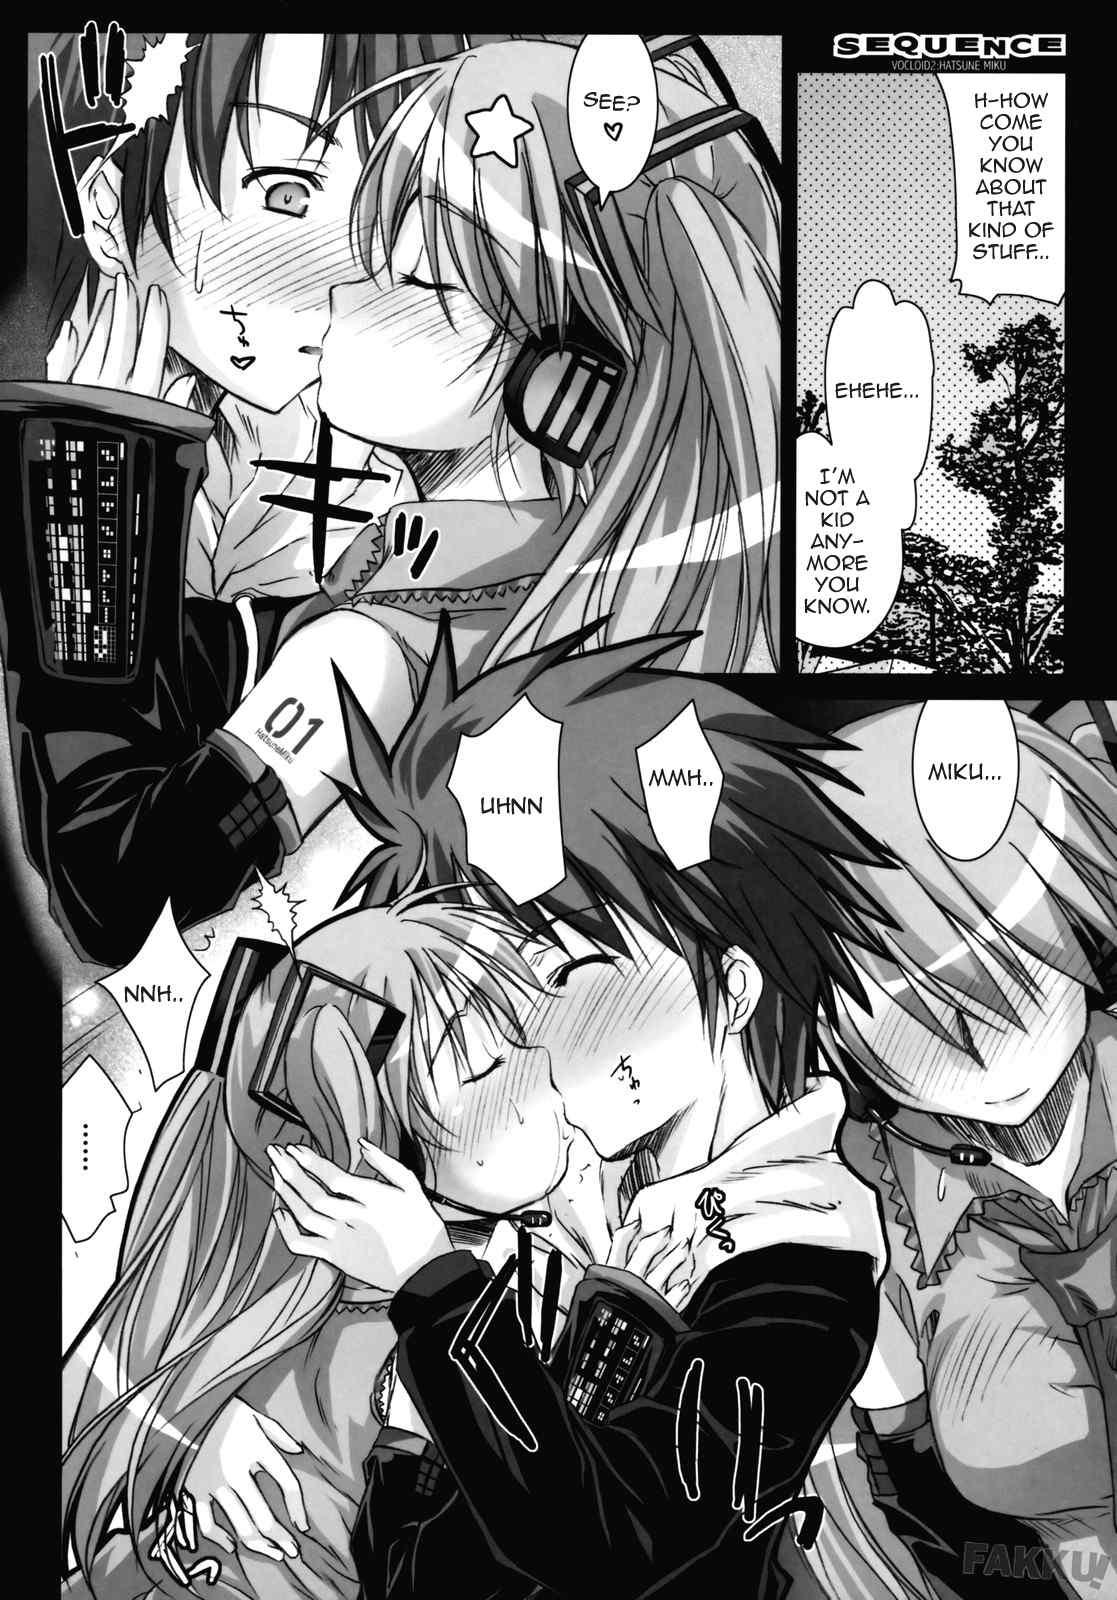 Blow Job Contest Sequence - Vocaloid Doctor Sex - Page 12